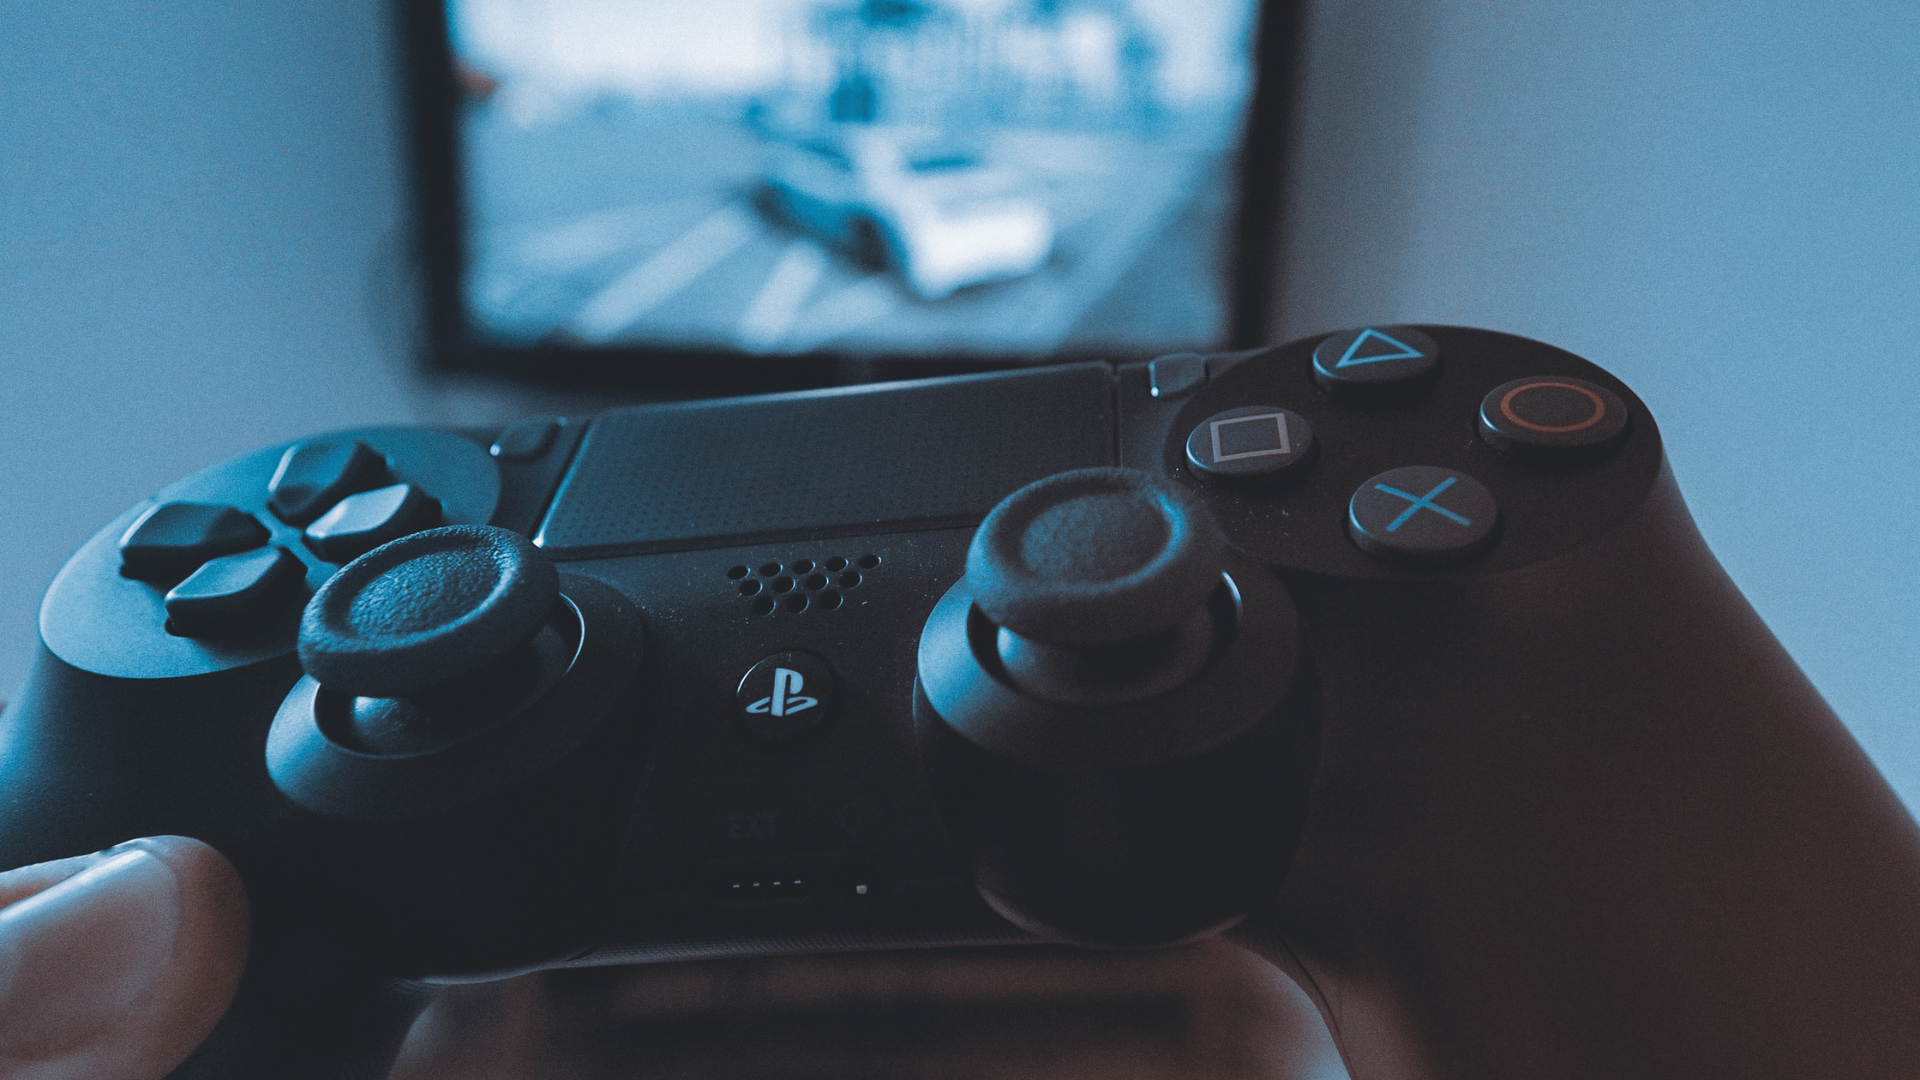 An Unbiased Guide To The Best Gaming Consoles On The Market Today